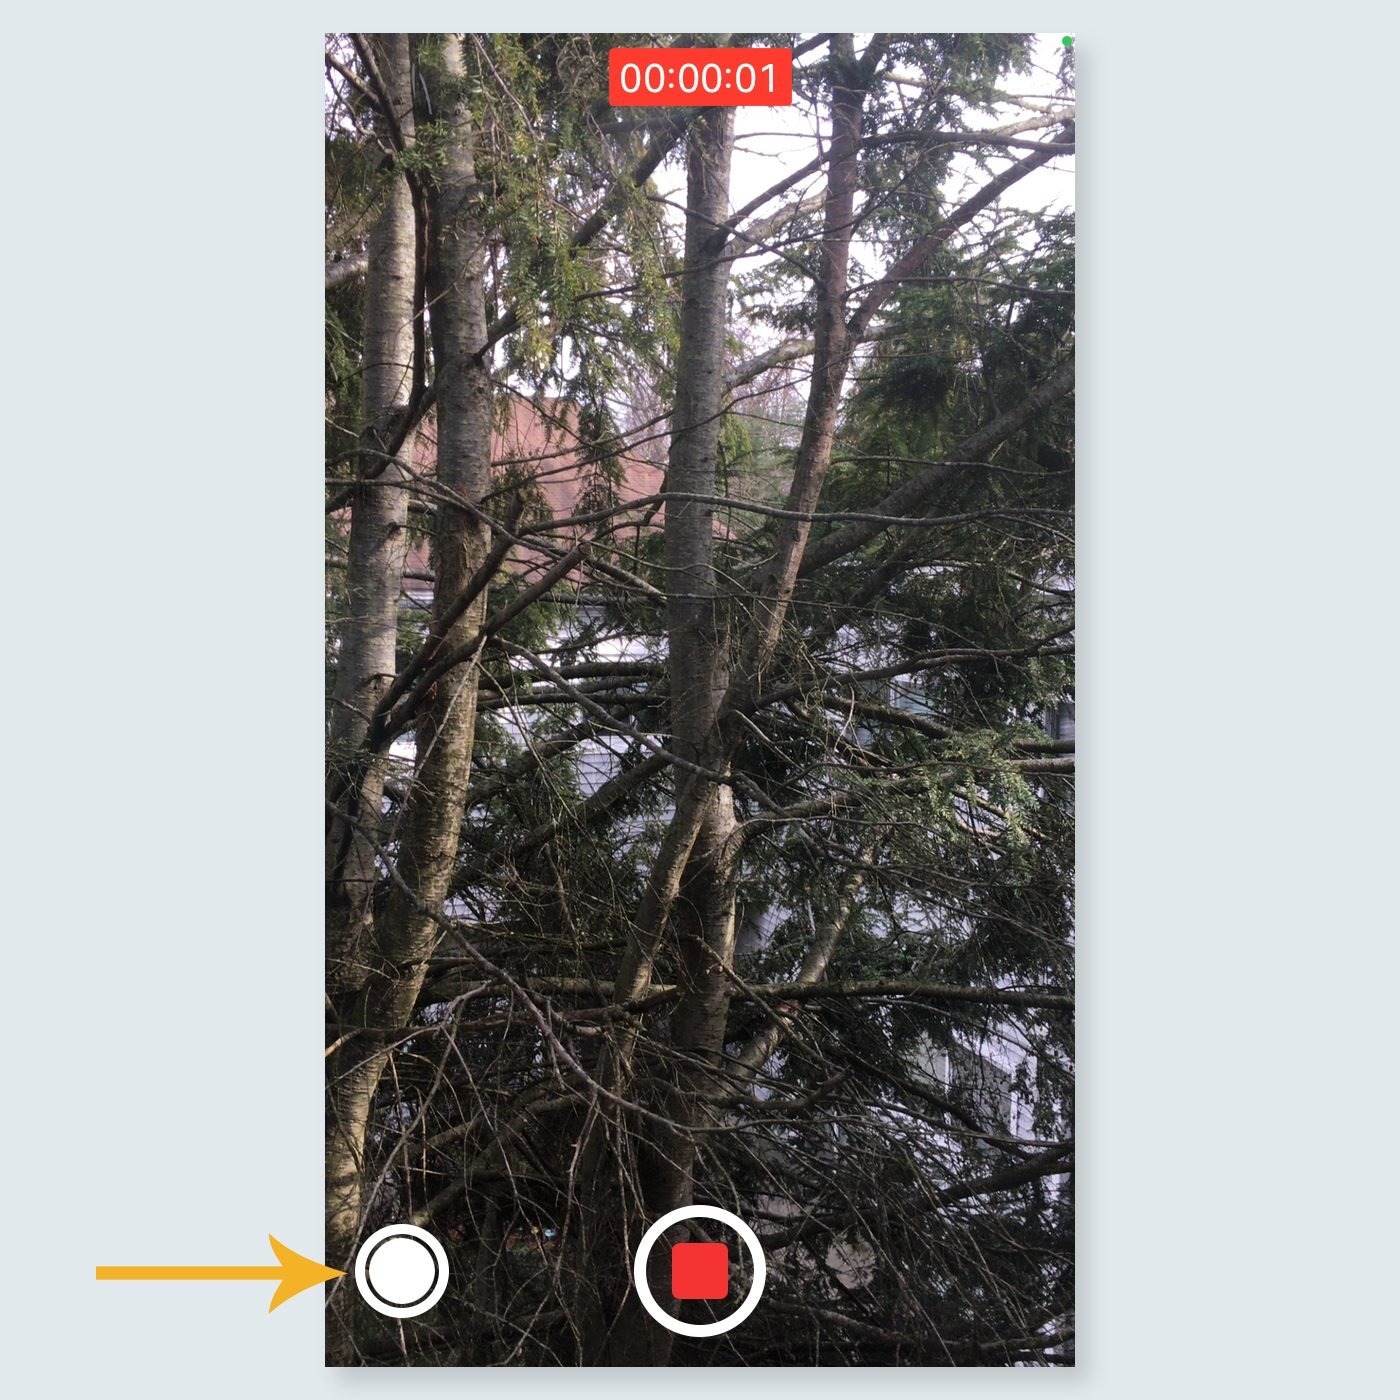 Simultaneous recording of video and photo on iPhone